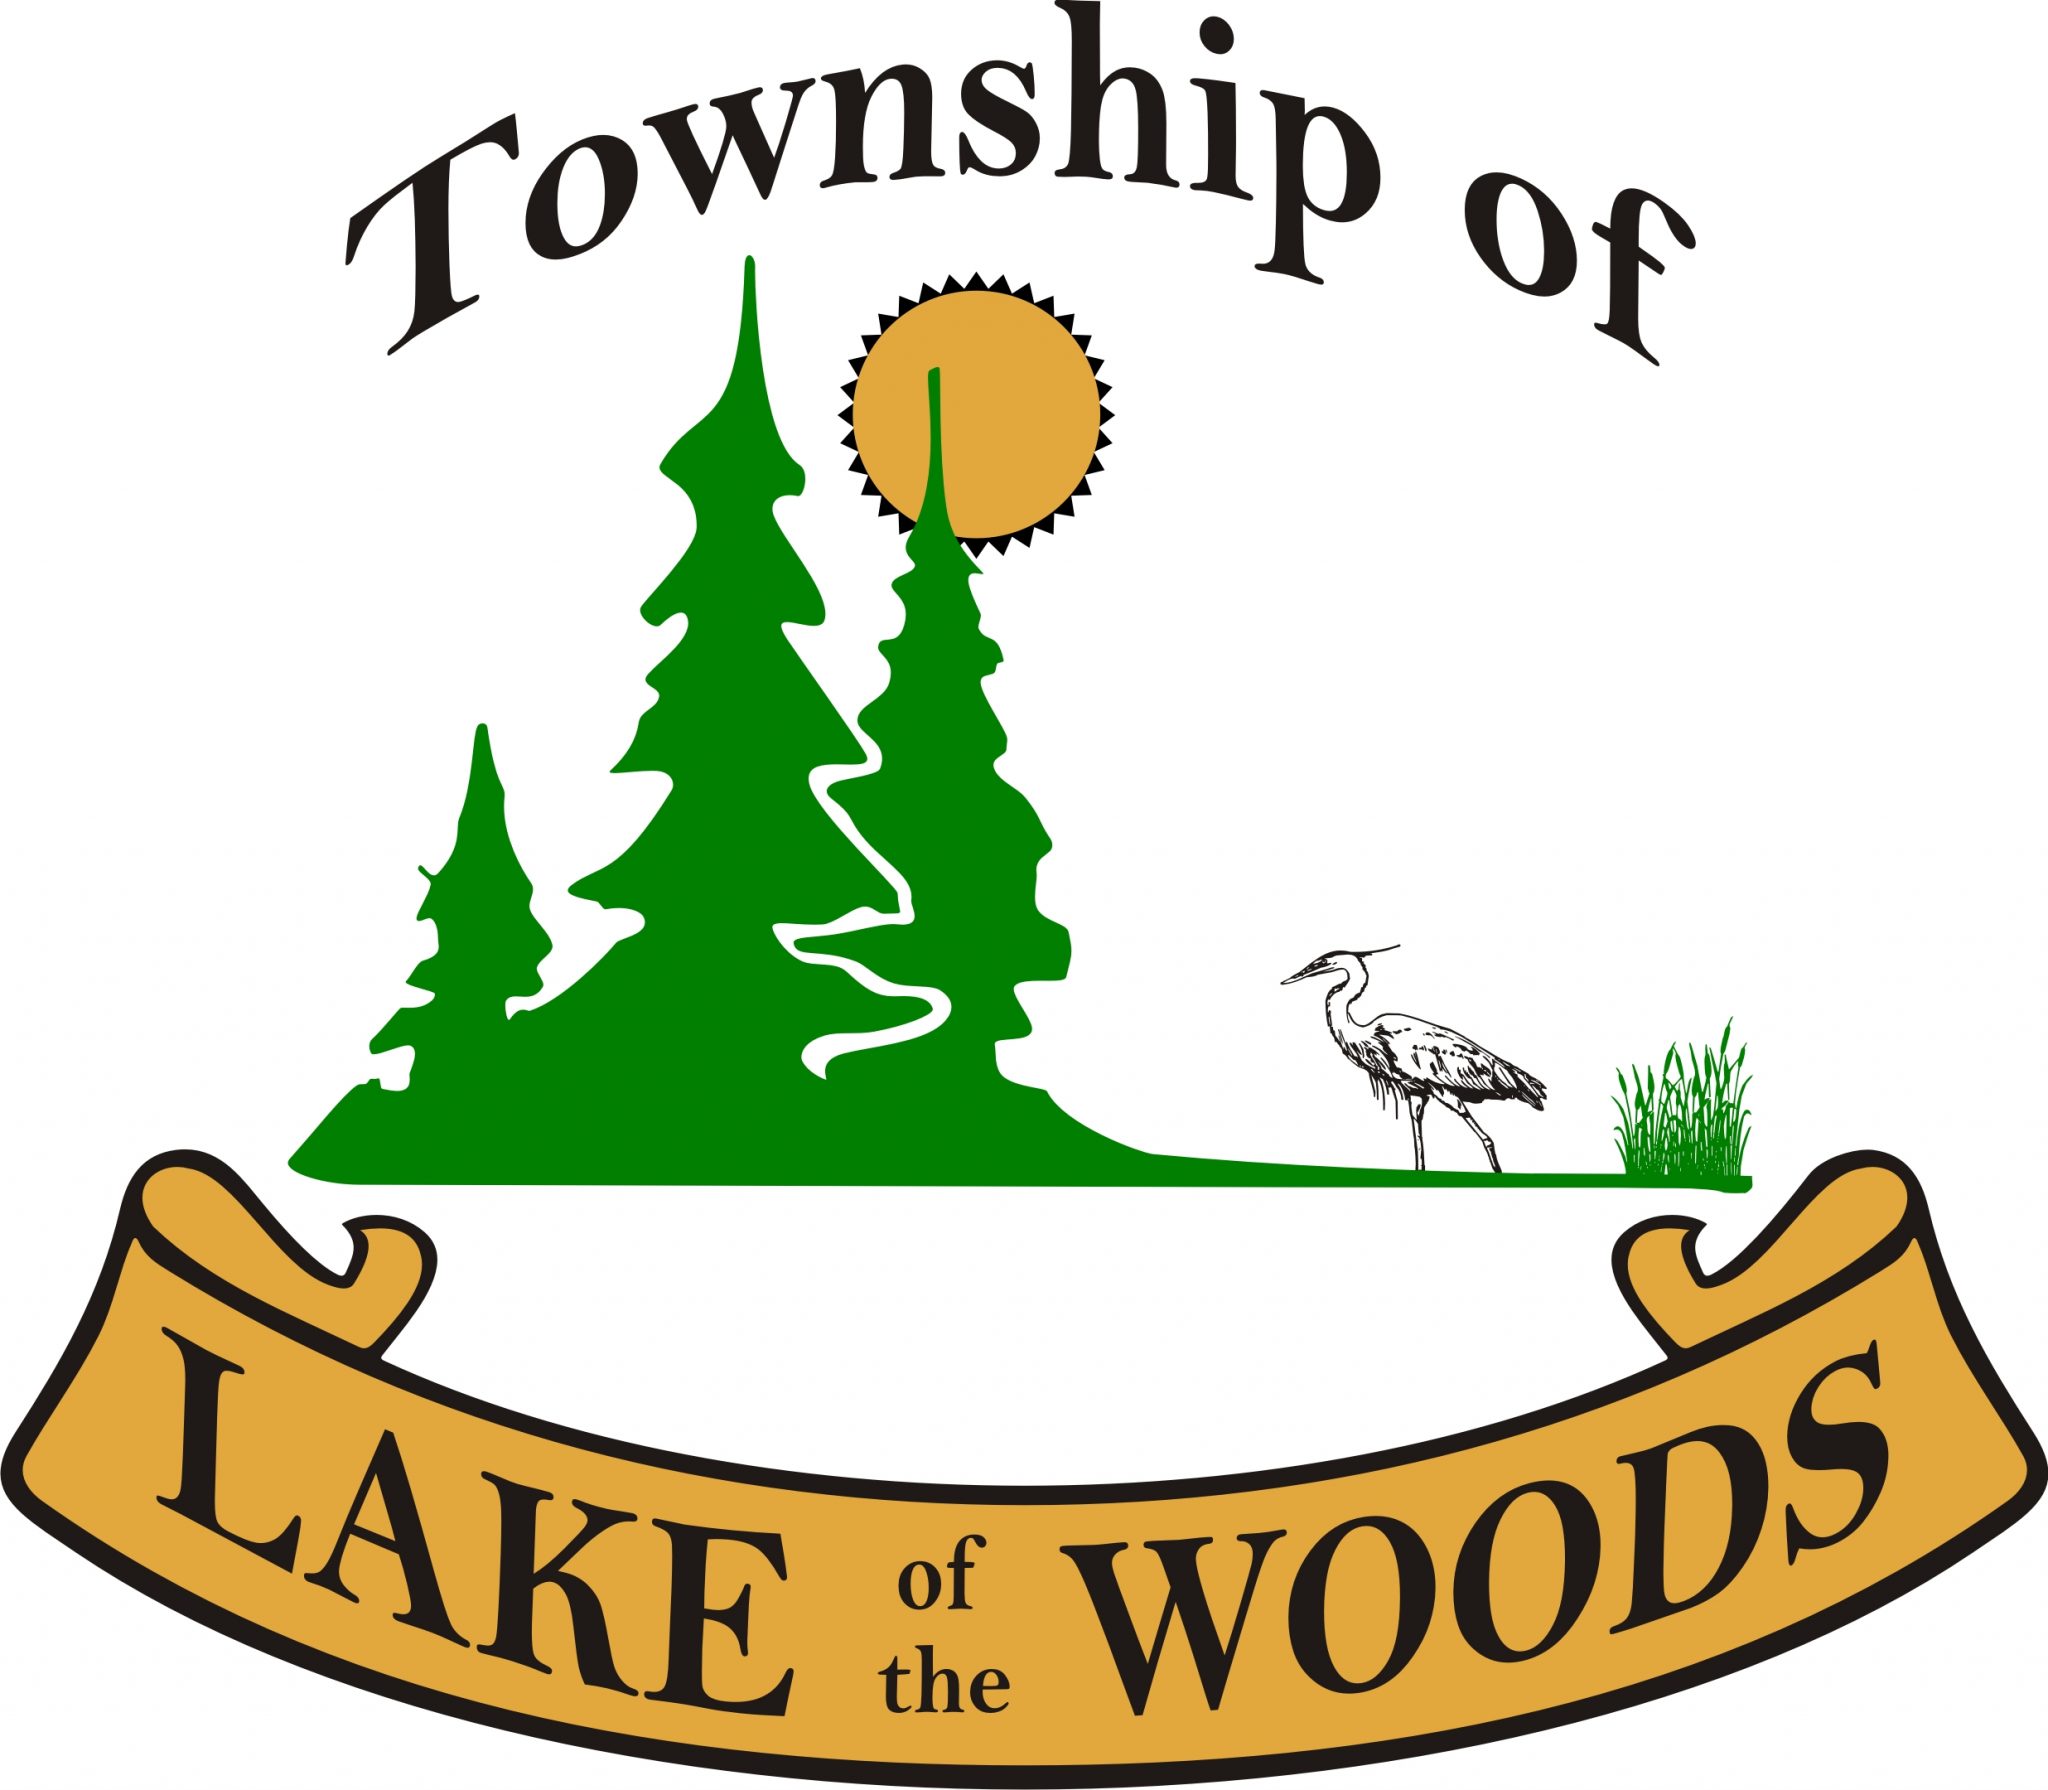 Lake of the Woods Township